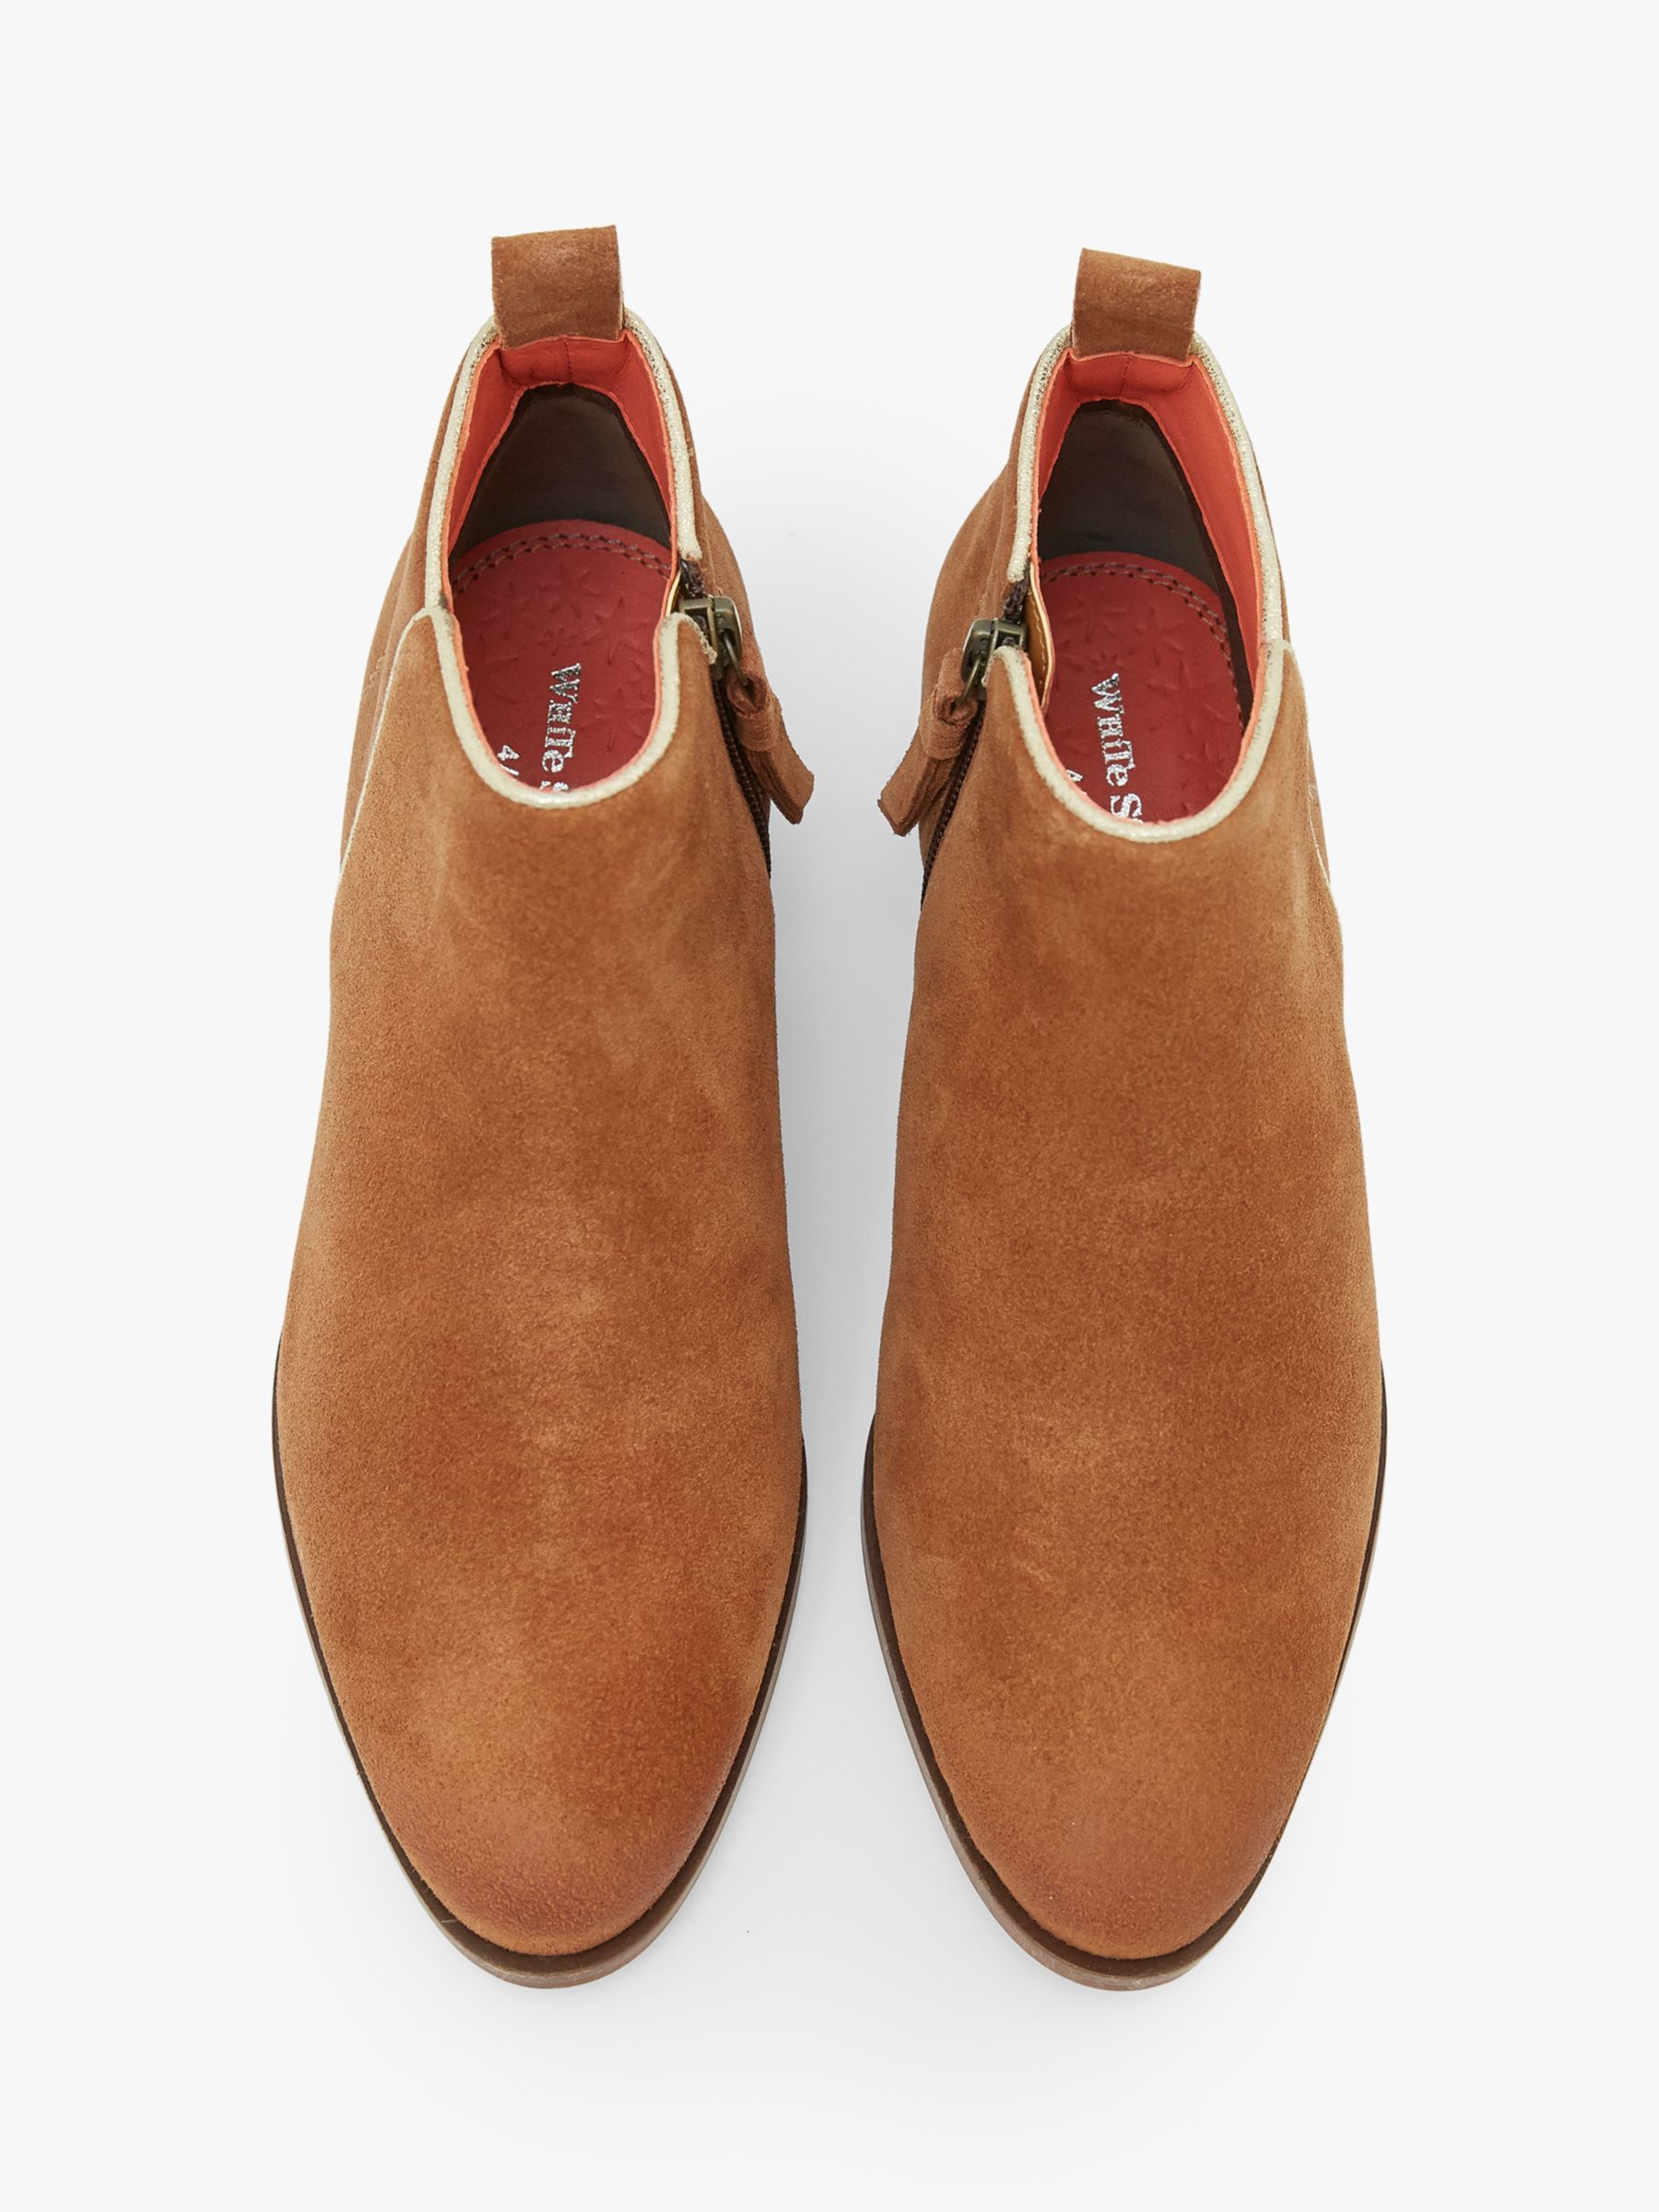 White Stuff Willow Suede Low Heel Ankle Boots, Mid Tan at John Lewis ...